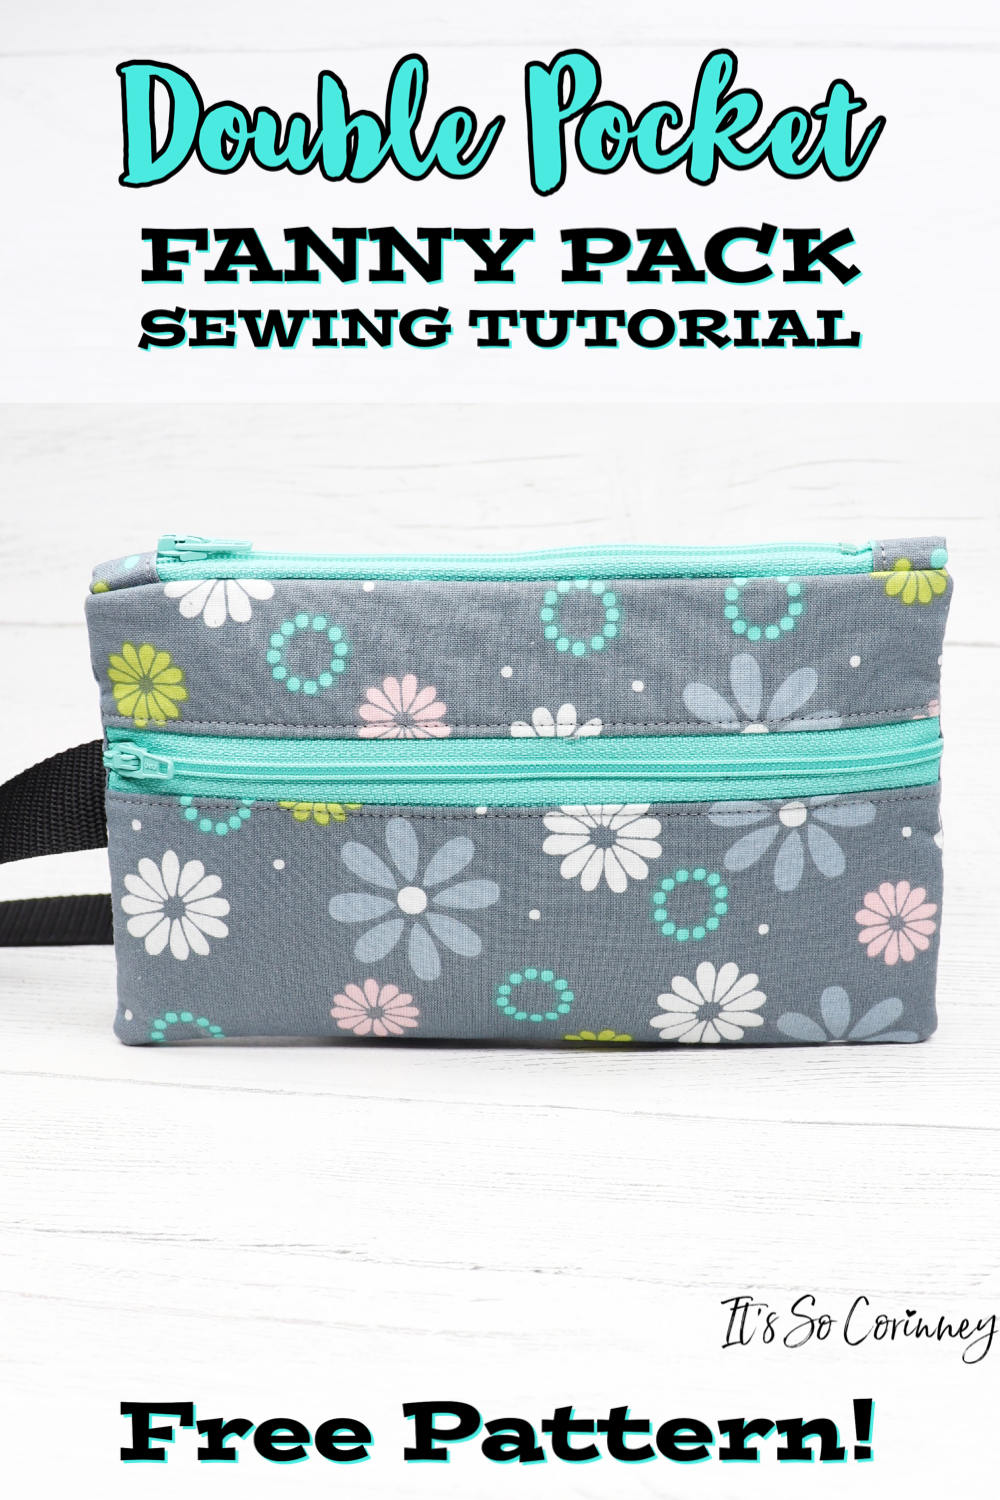 Double Pocket Fanny Pack Sewing Tutorial ~ It's So Corinney